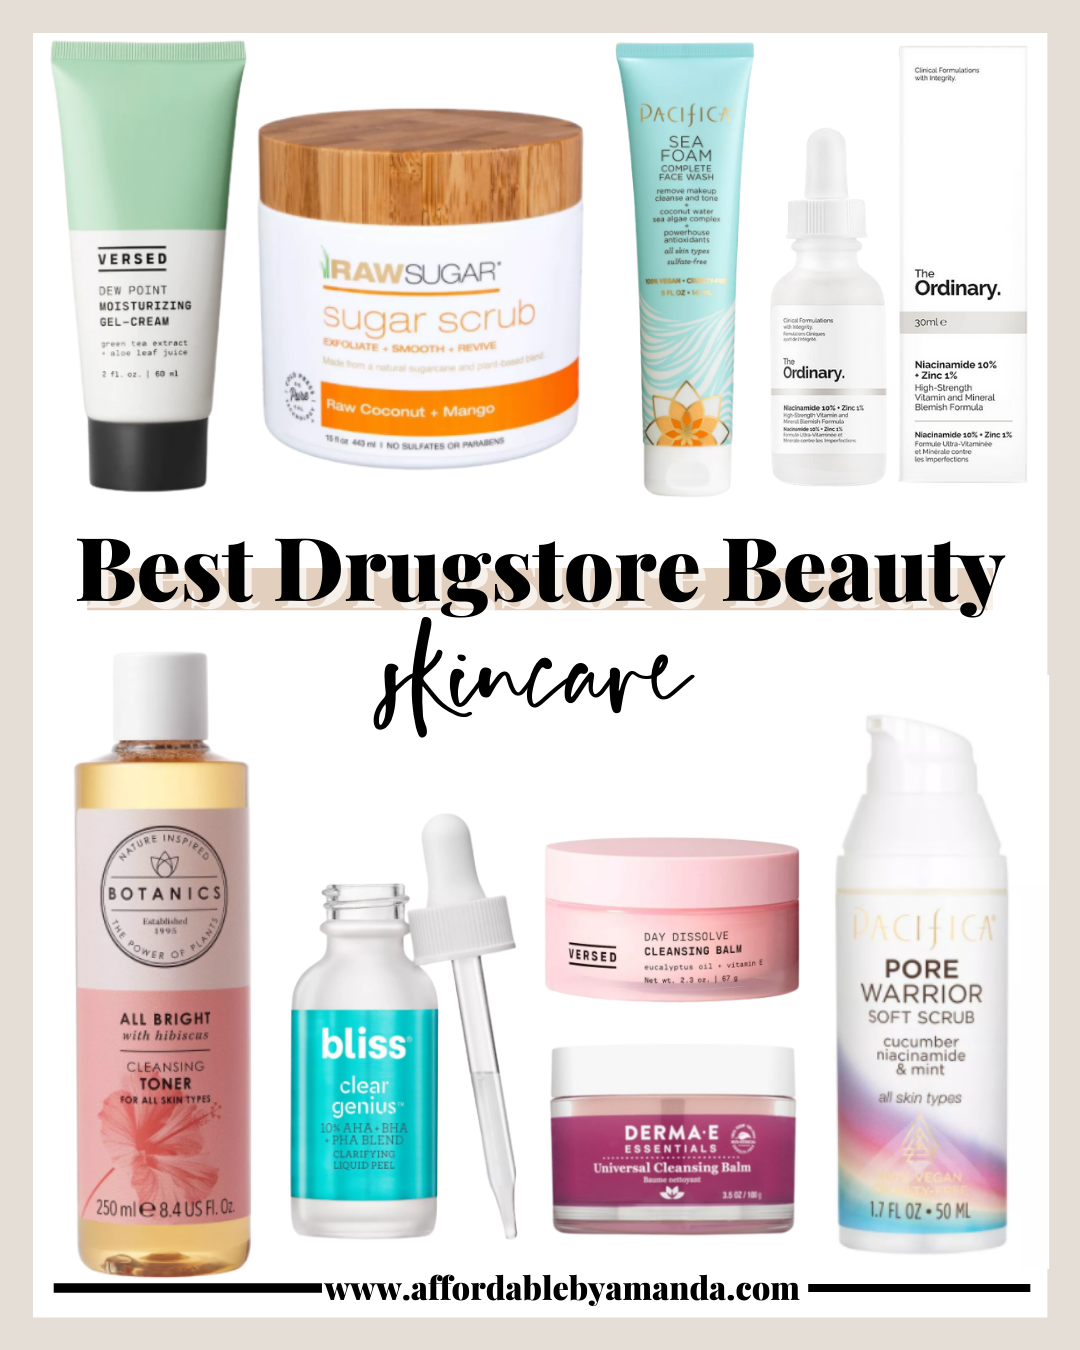 Best Drugstore Beauty - Skincare at the Drugstore | Affordable by Amanda